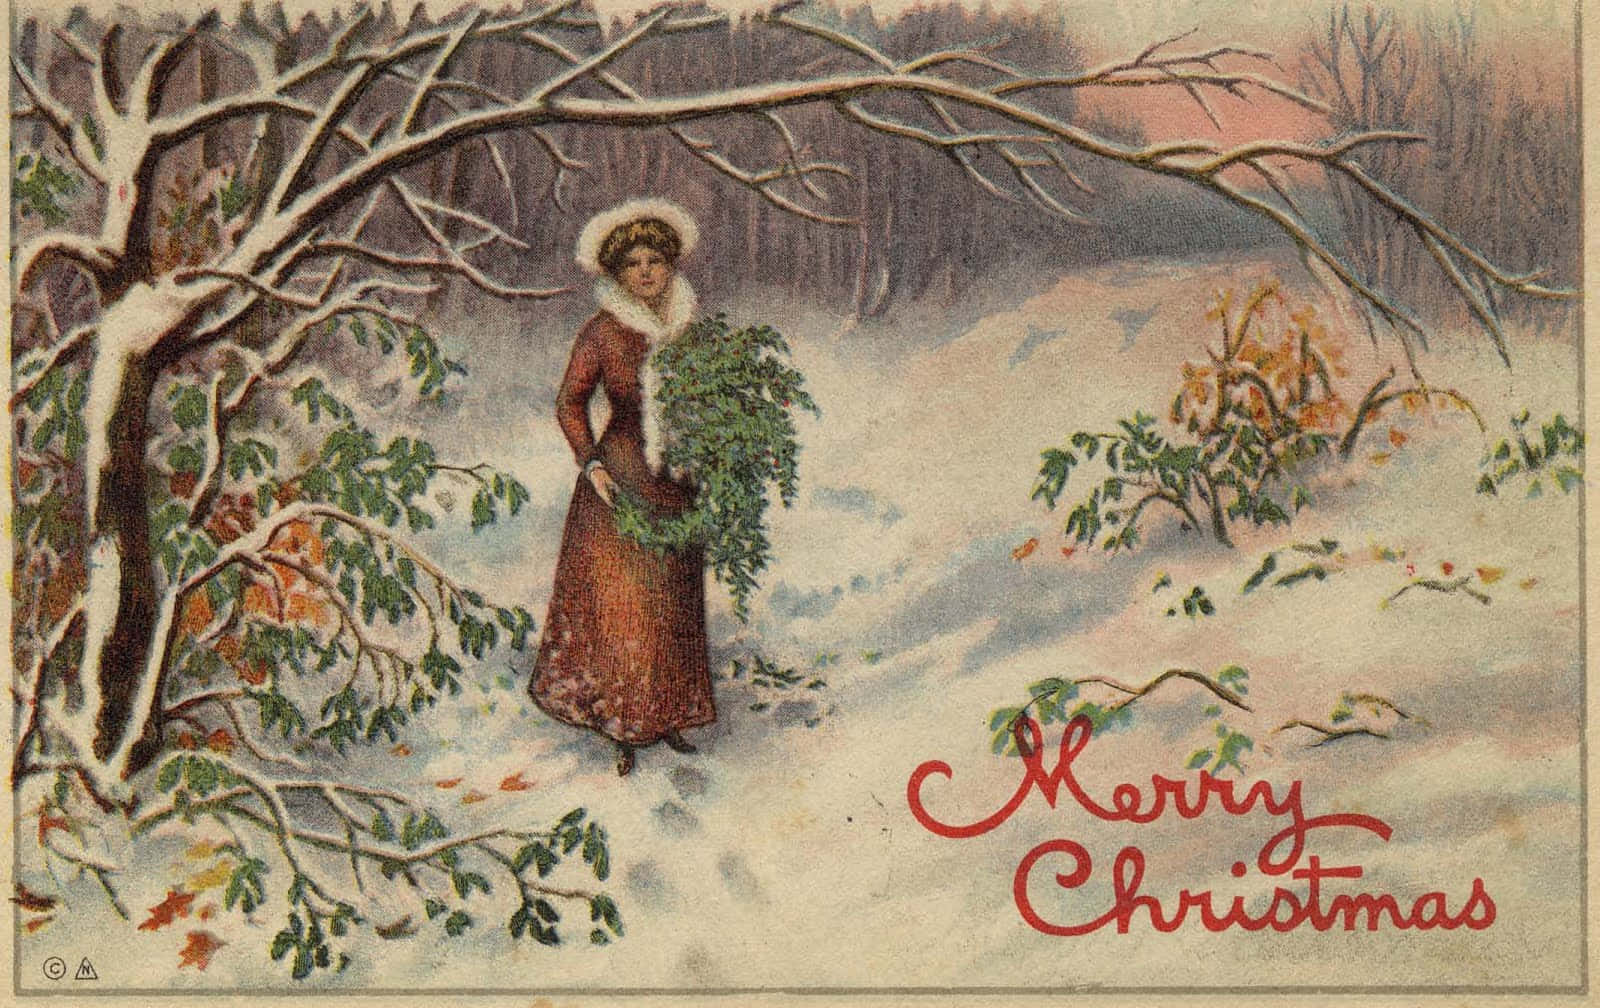 Celebrate the Holidays with this Vintage Christmas Vignette"